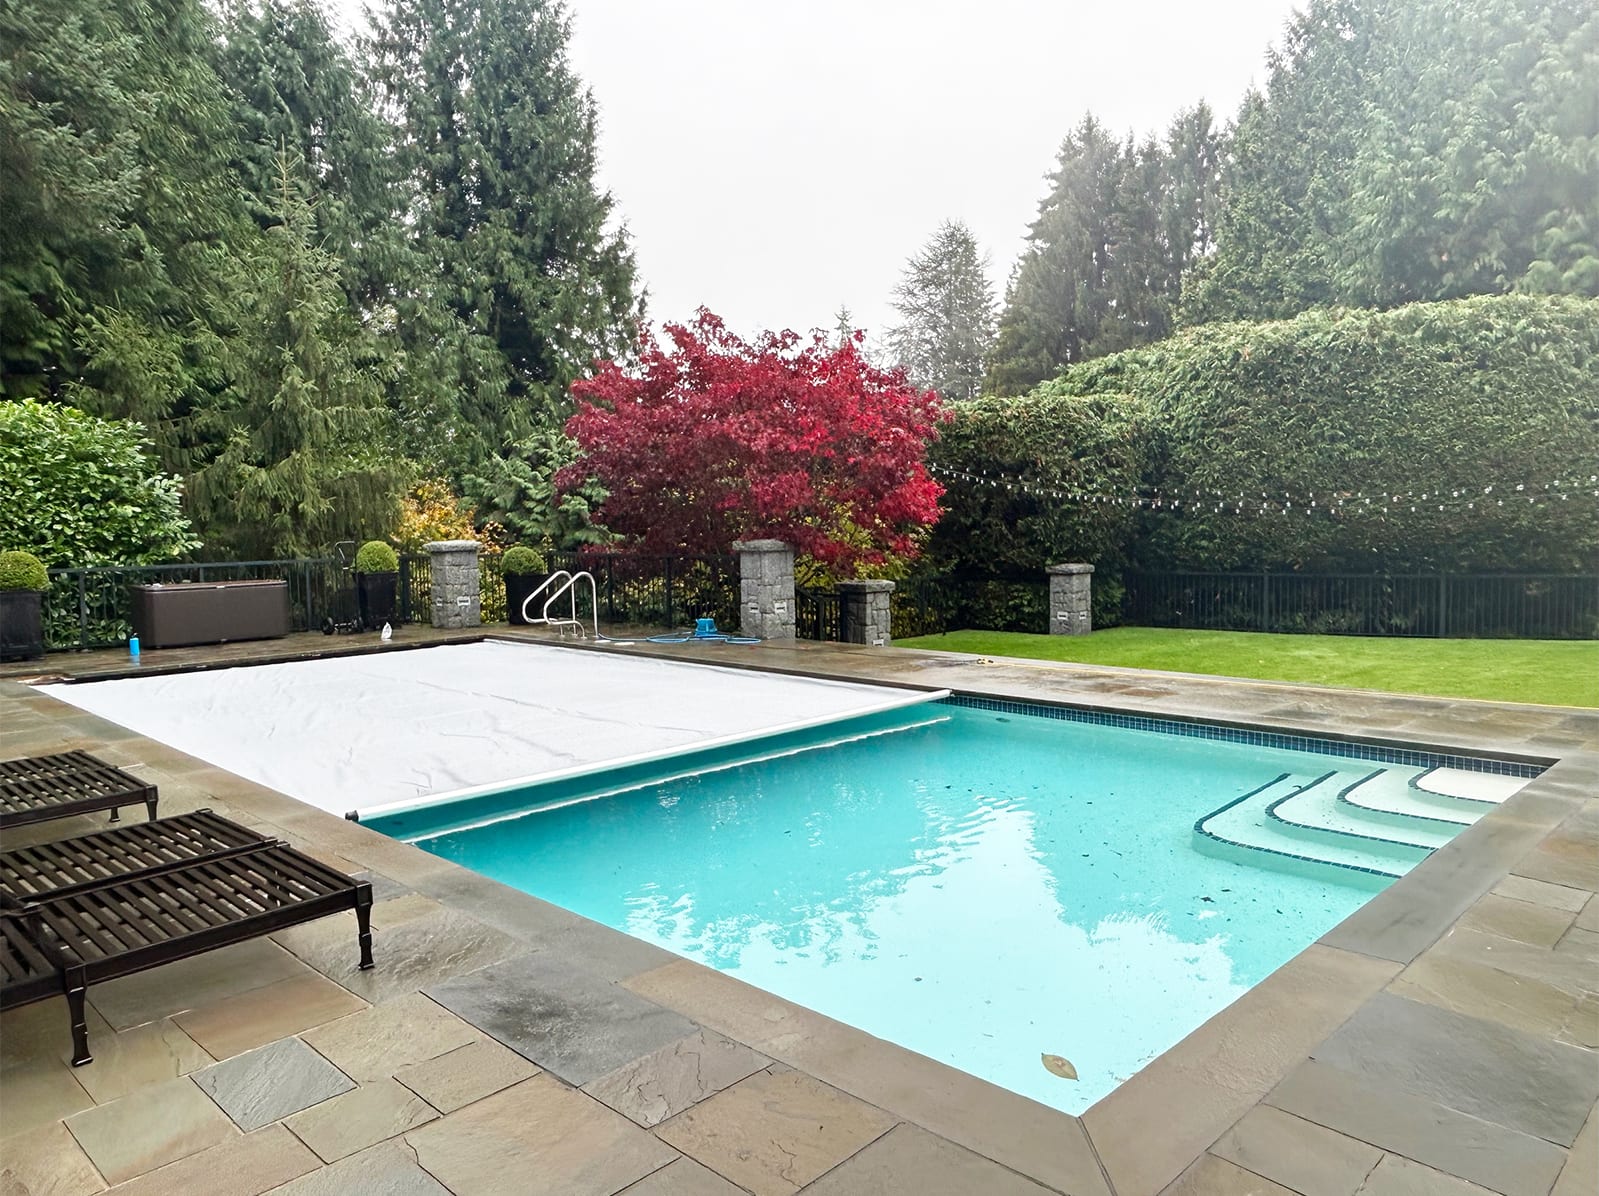 Old, worn-out auto pool cover fabric is not only an eyesore—it poses safety risks and compromises the integrity of your cover. Order your replacement fabric with Pool Patrol by April 30, 2024, to save on your backyard investment.